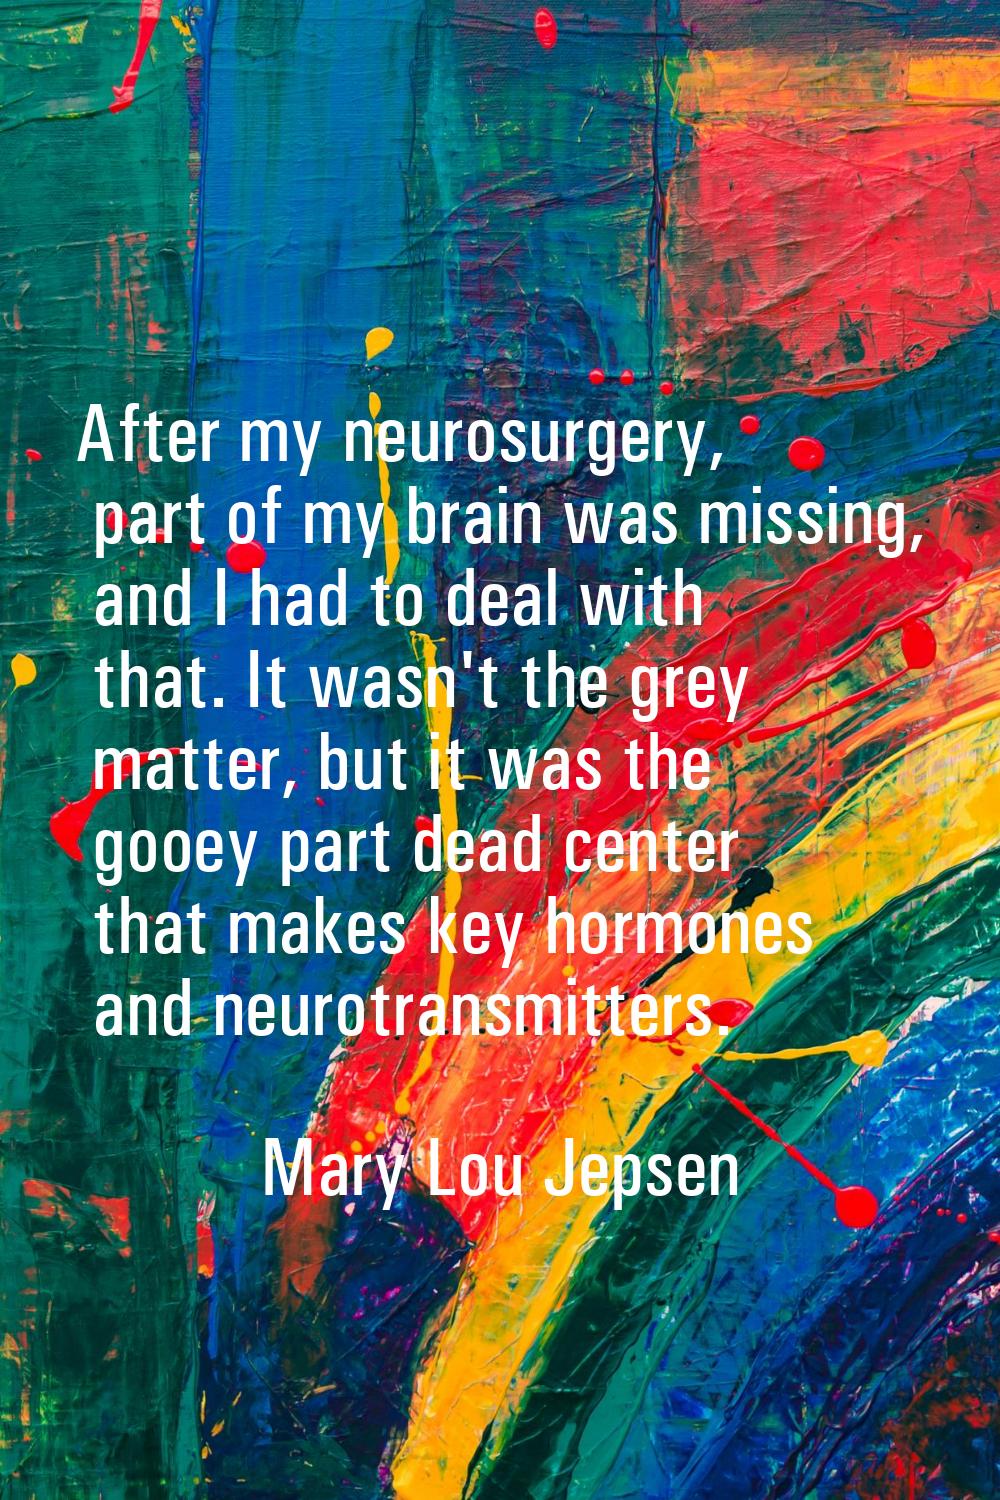 After my neurosurgery, part of my brain was missing, and I had to deal with that. It wasn't the gre